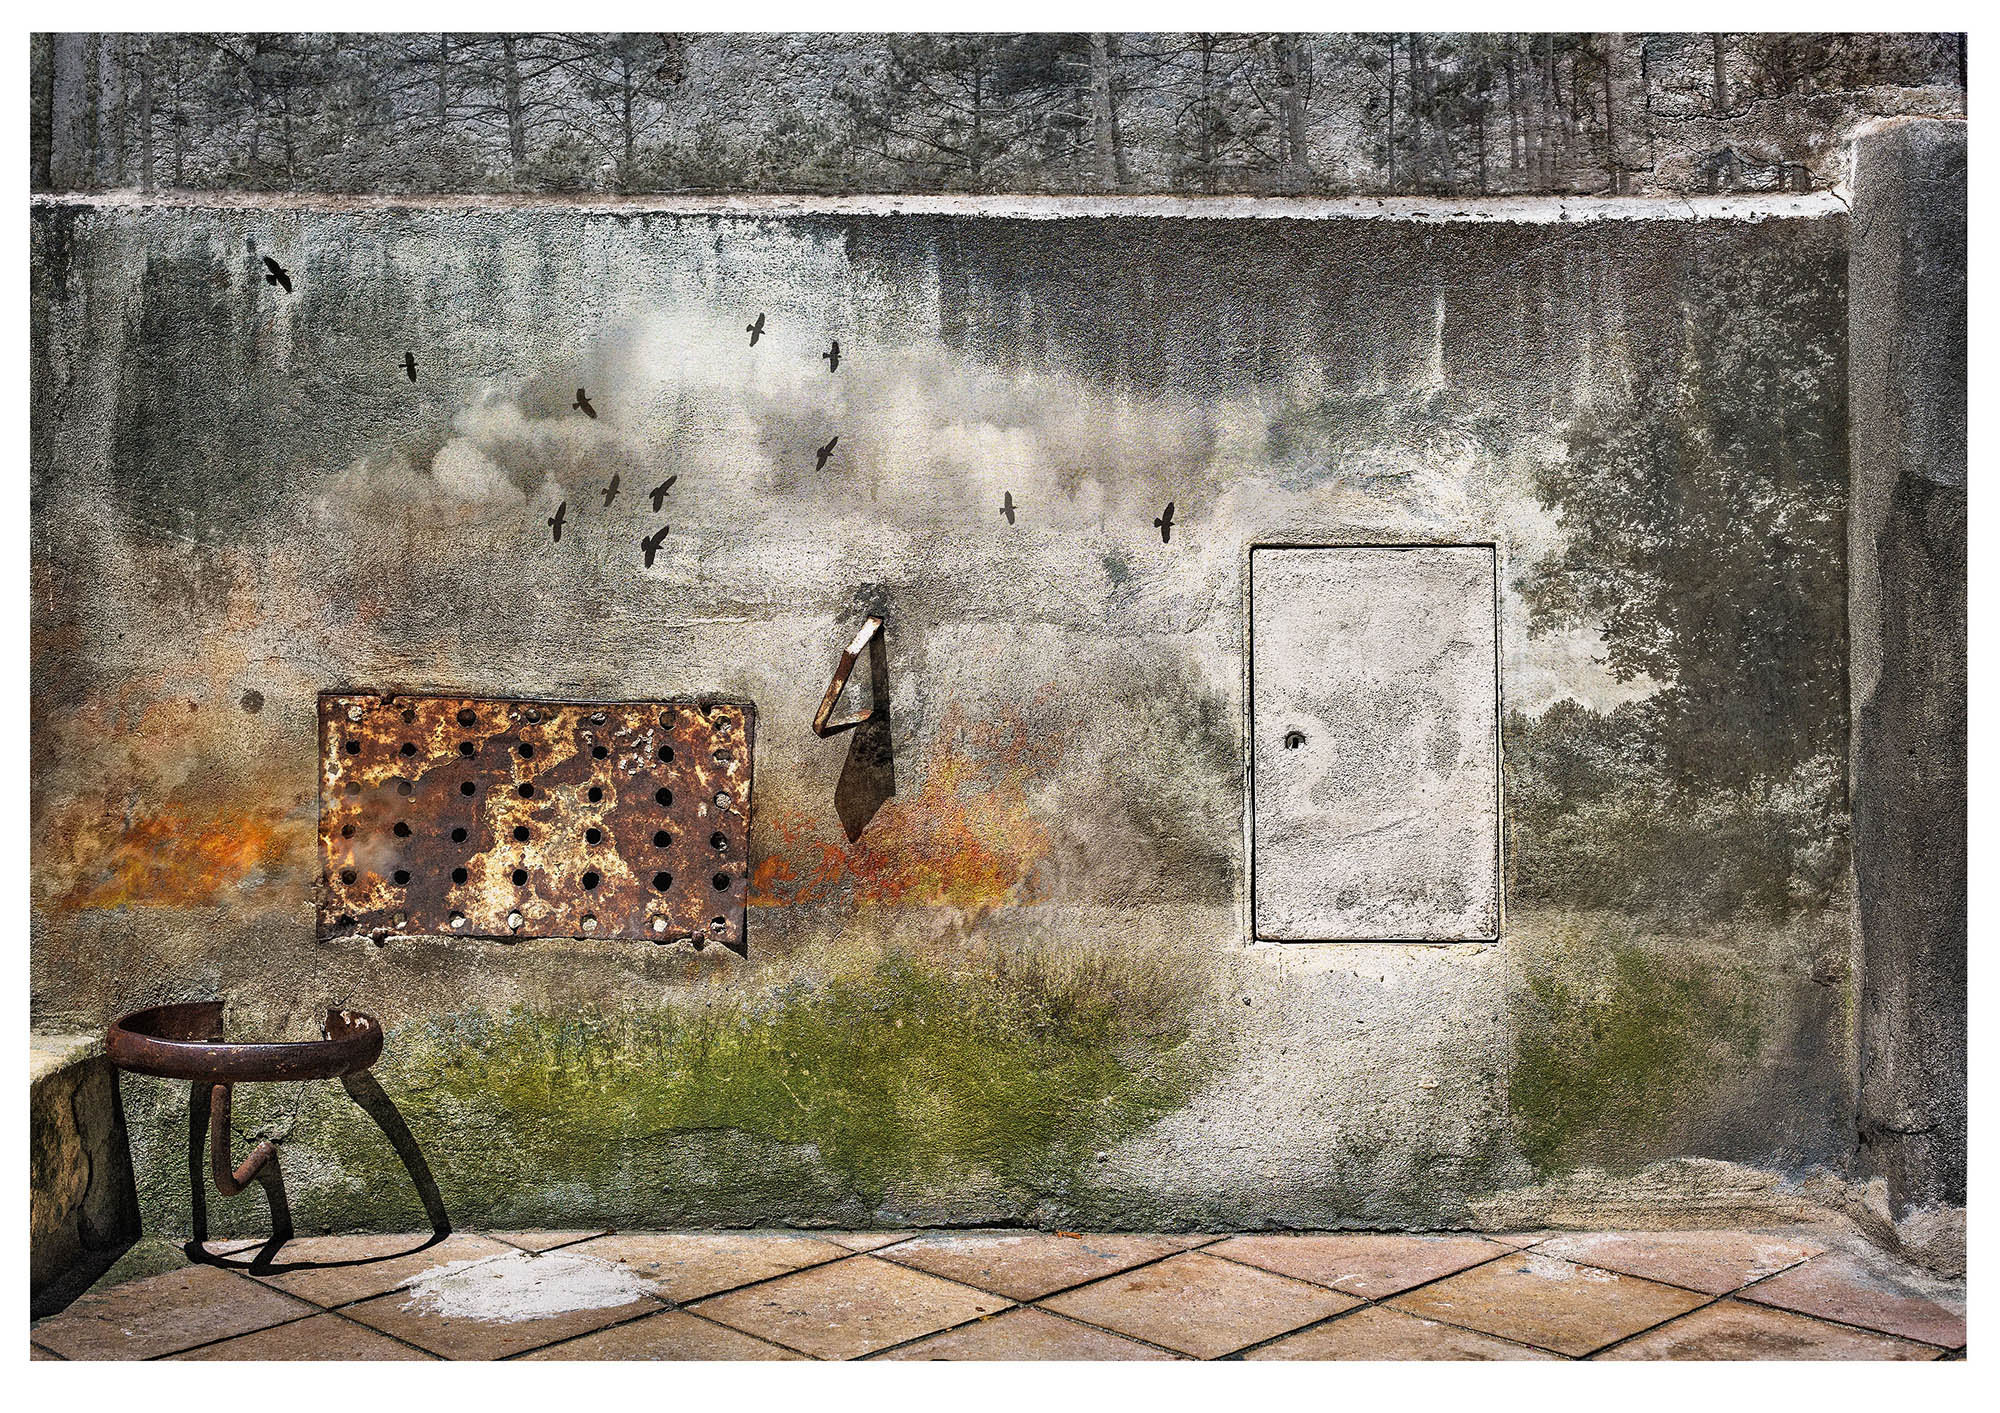 4th in series: wall overlaid with forest fire- a mysterious metal door in the wall suggesting a way out.